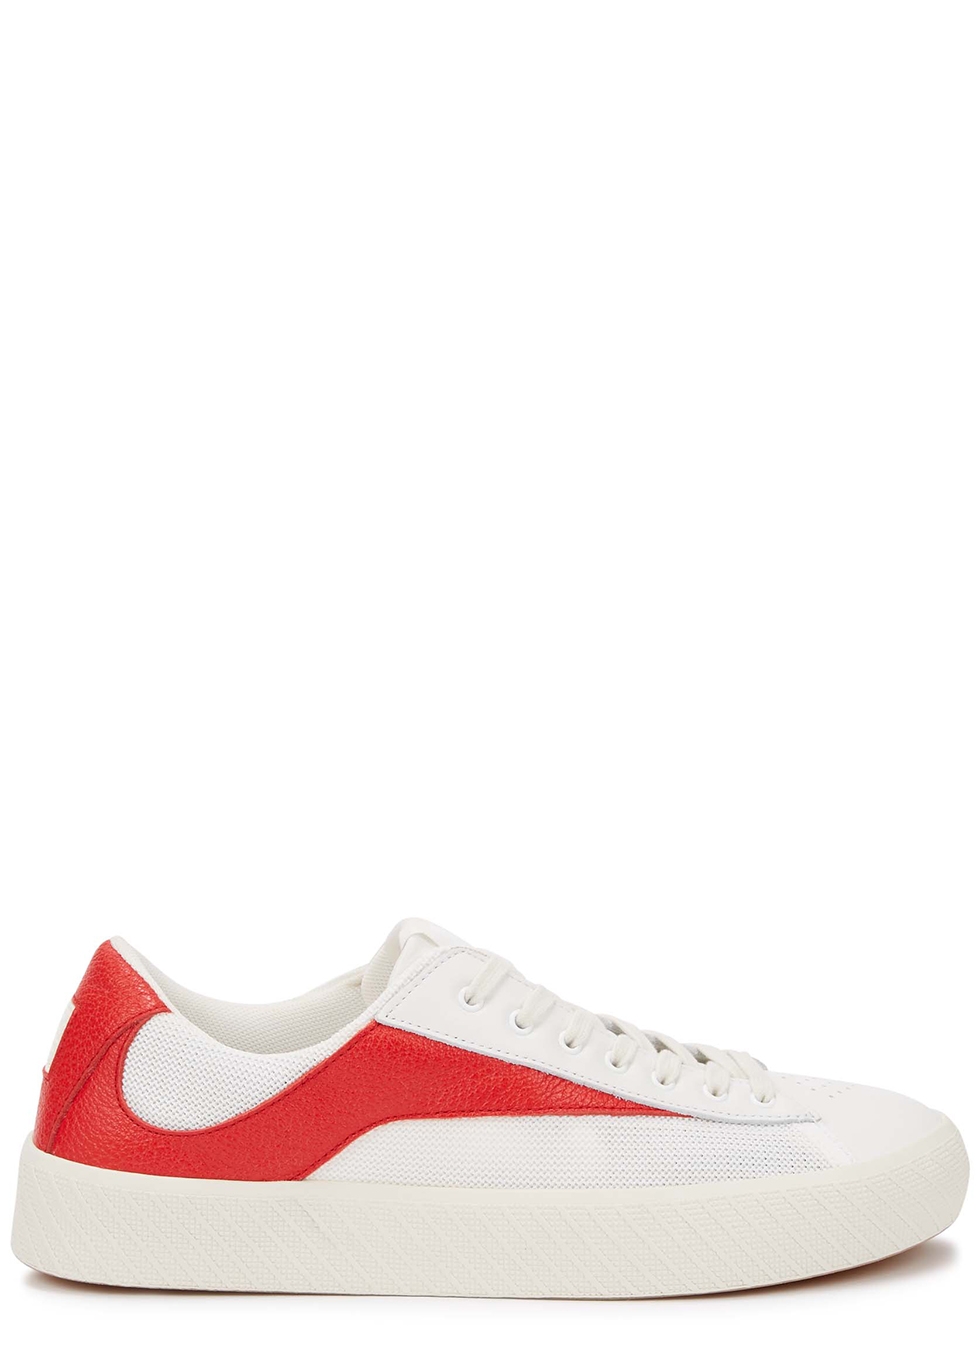 Rodina white and red leather sneakers